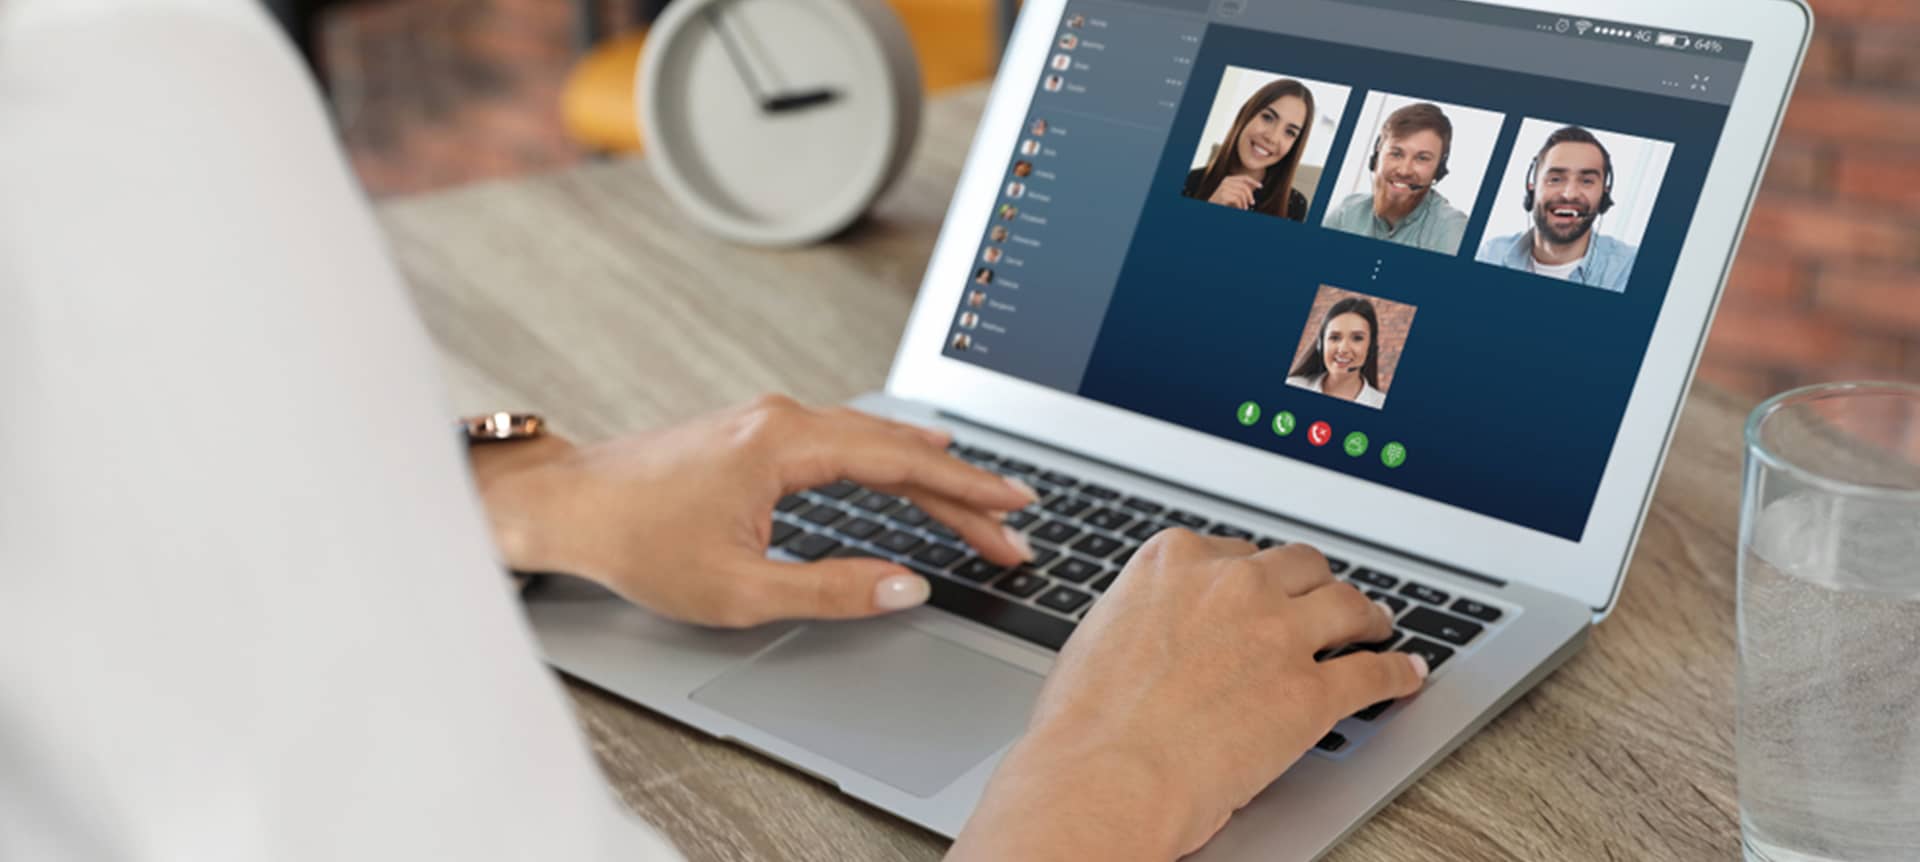 A recruiter providing feedback for candidate through video interviewing software 